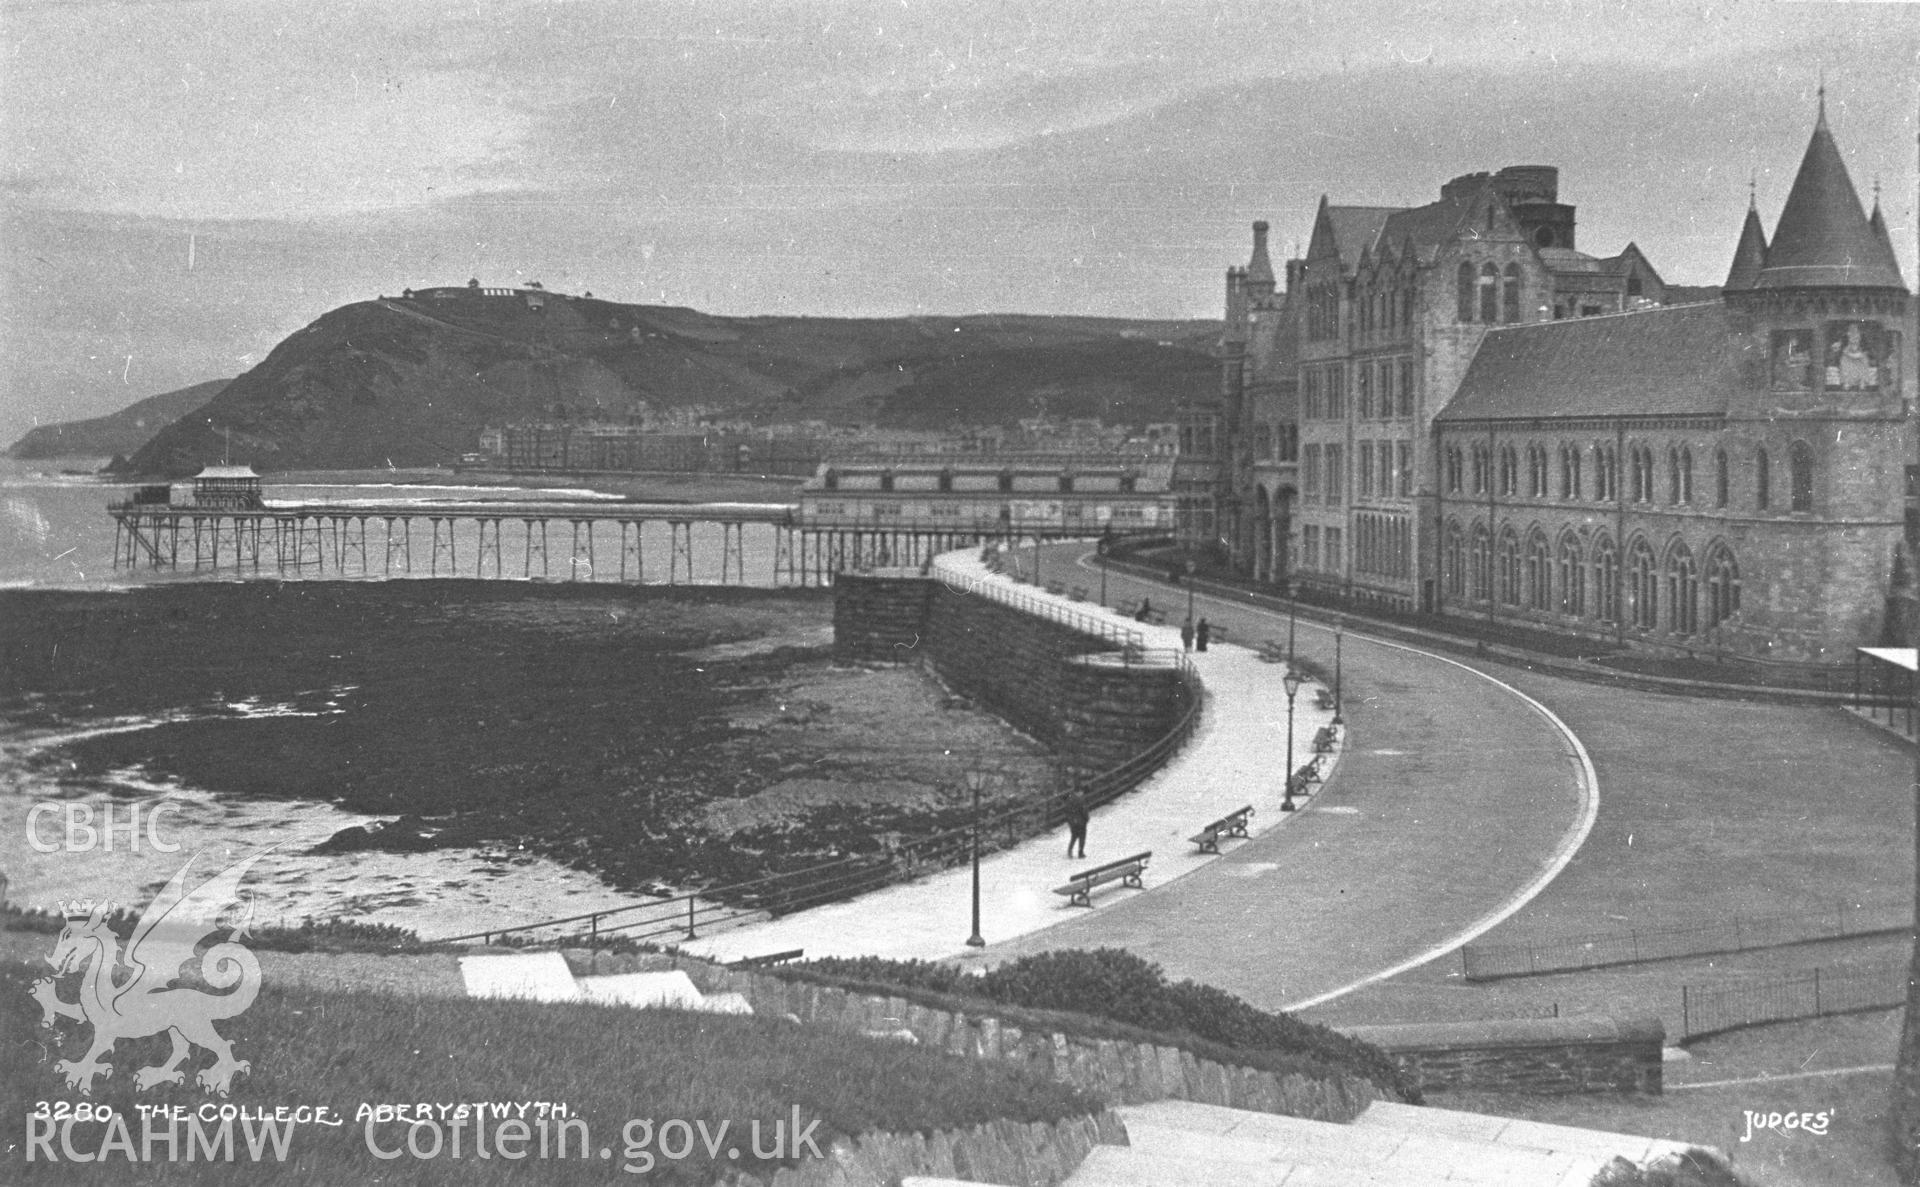 Digital copy of a Judges Postcard view of the Old College, Aberystwyth.